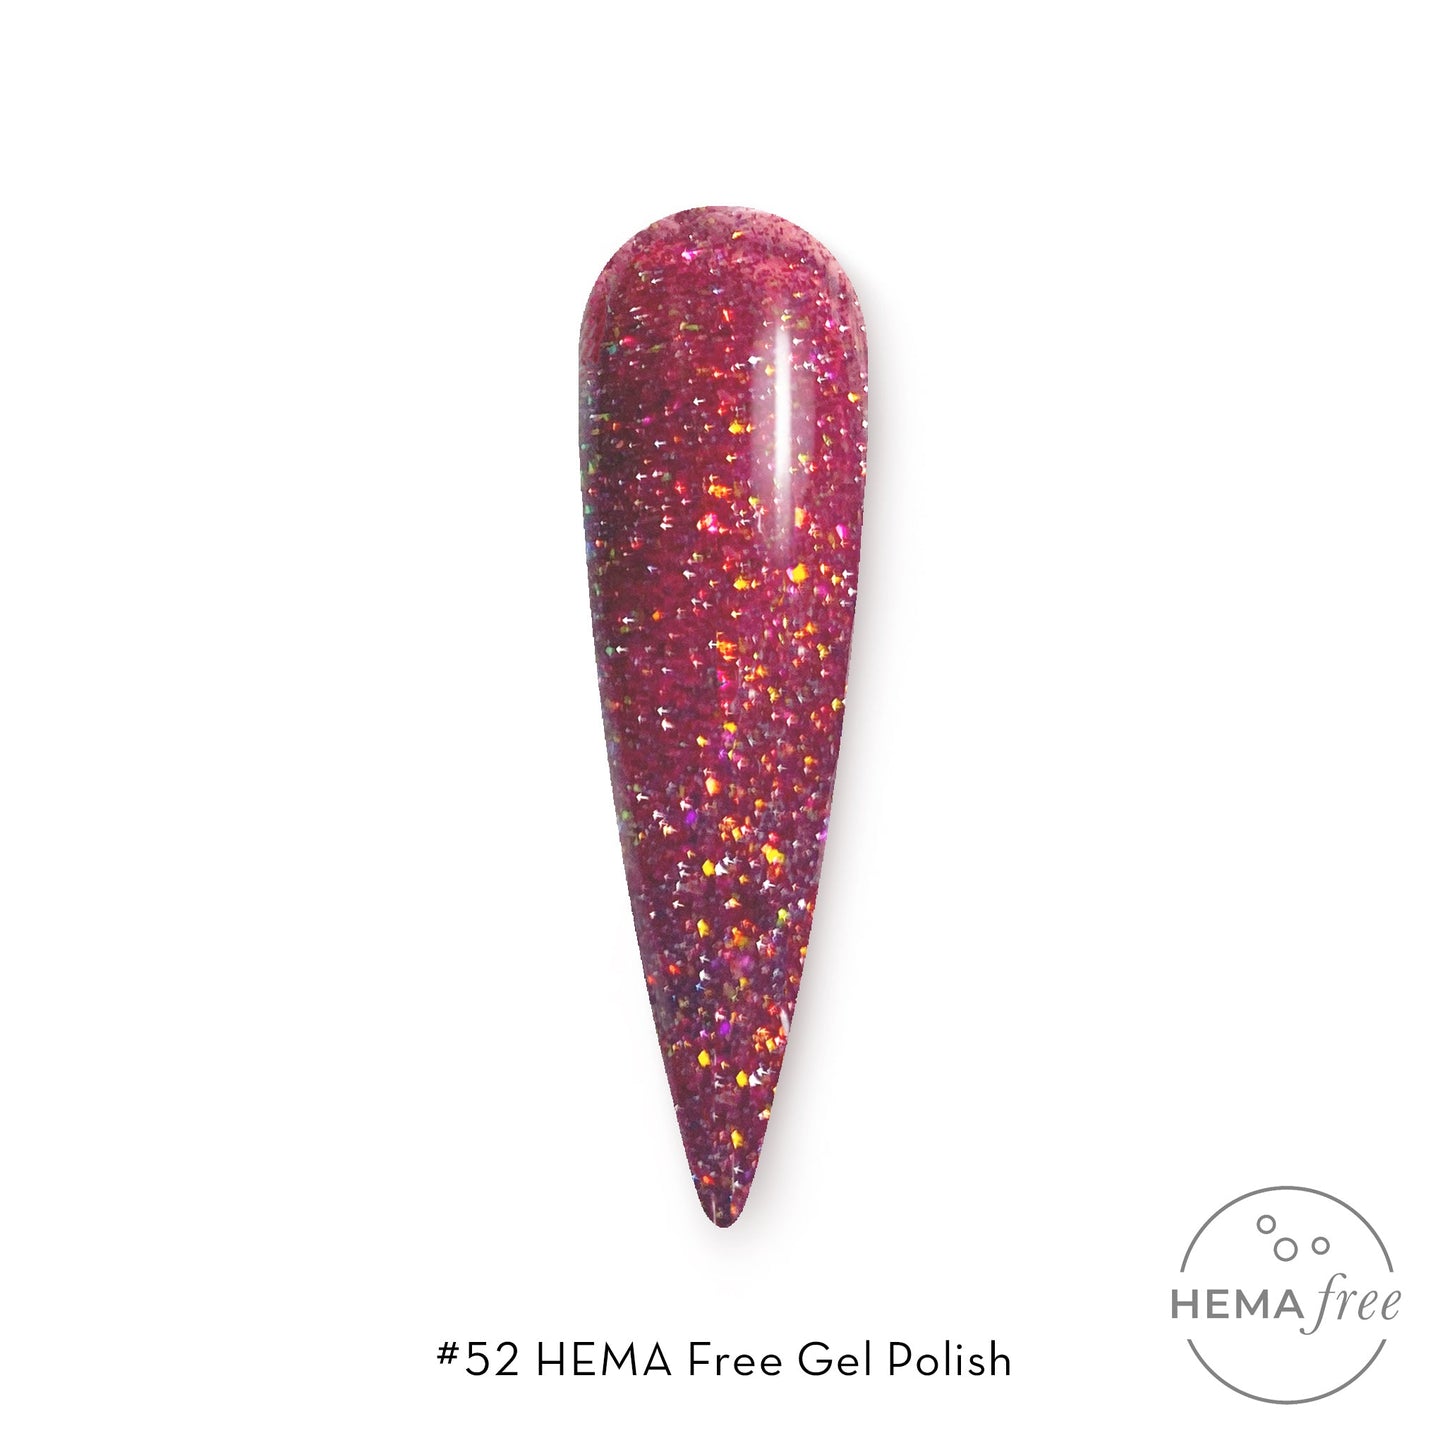 New! Holiday Collection HEMA Free Gel Polish  | Fortify by Fuzion